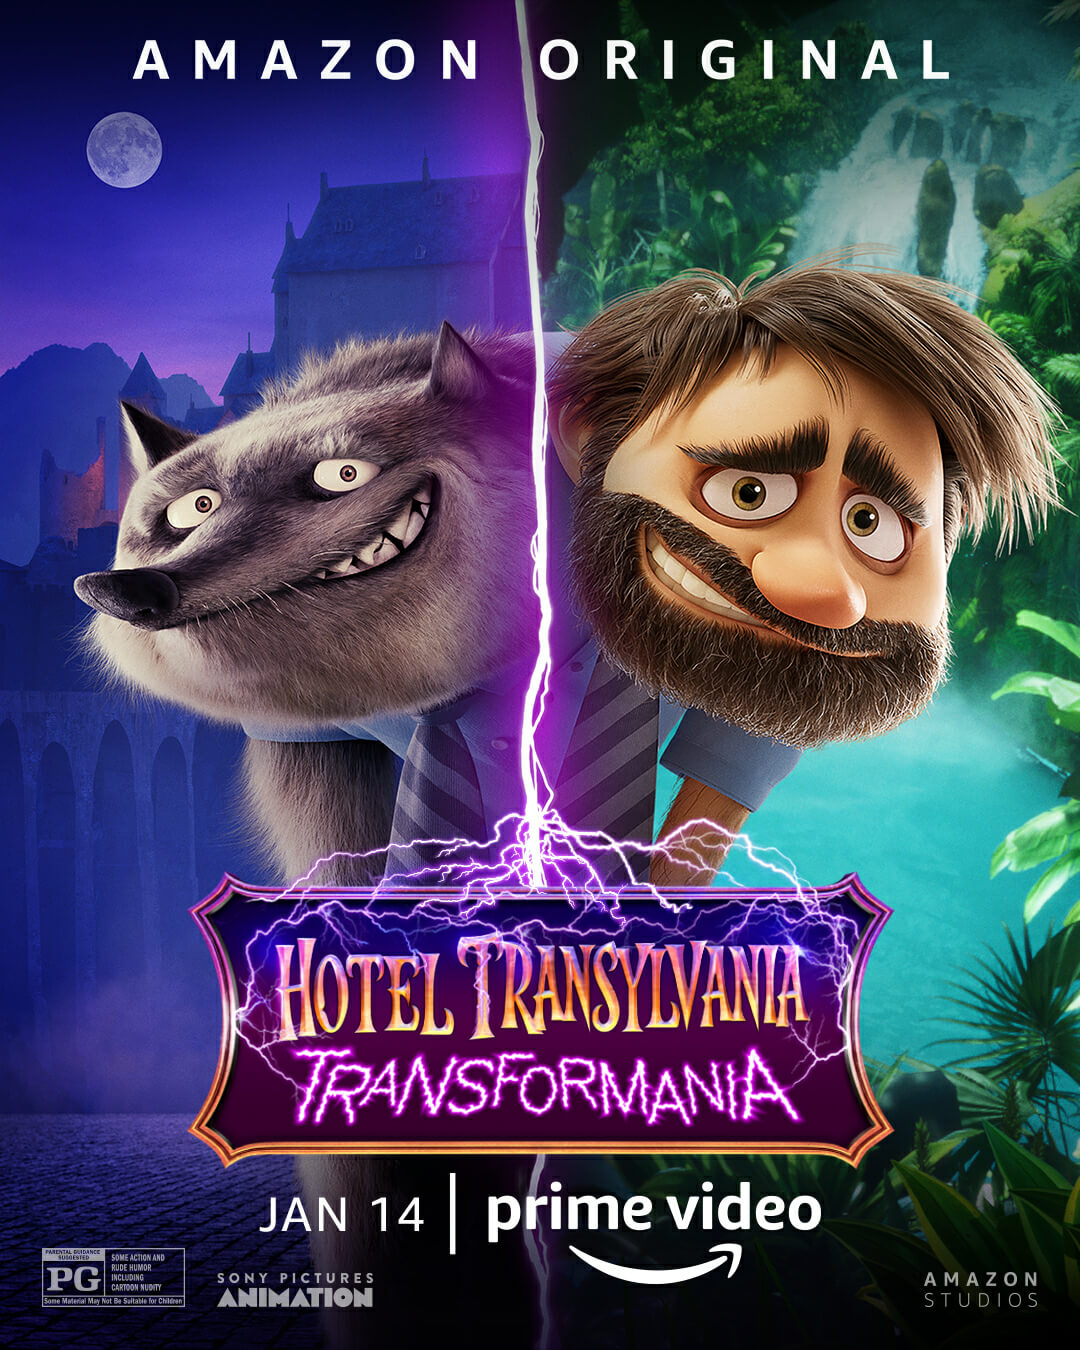 Animated movie Hotel Transylvania 4 Transformania released character posters-5